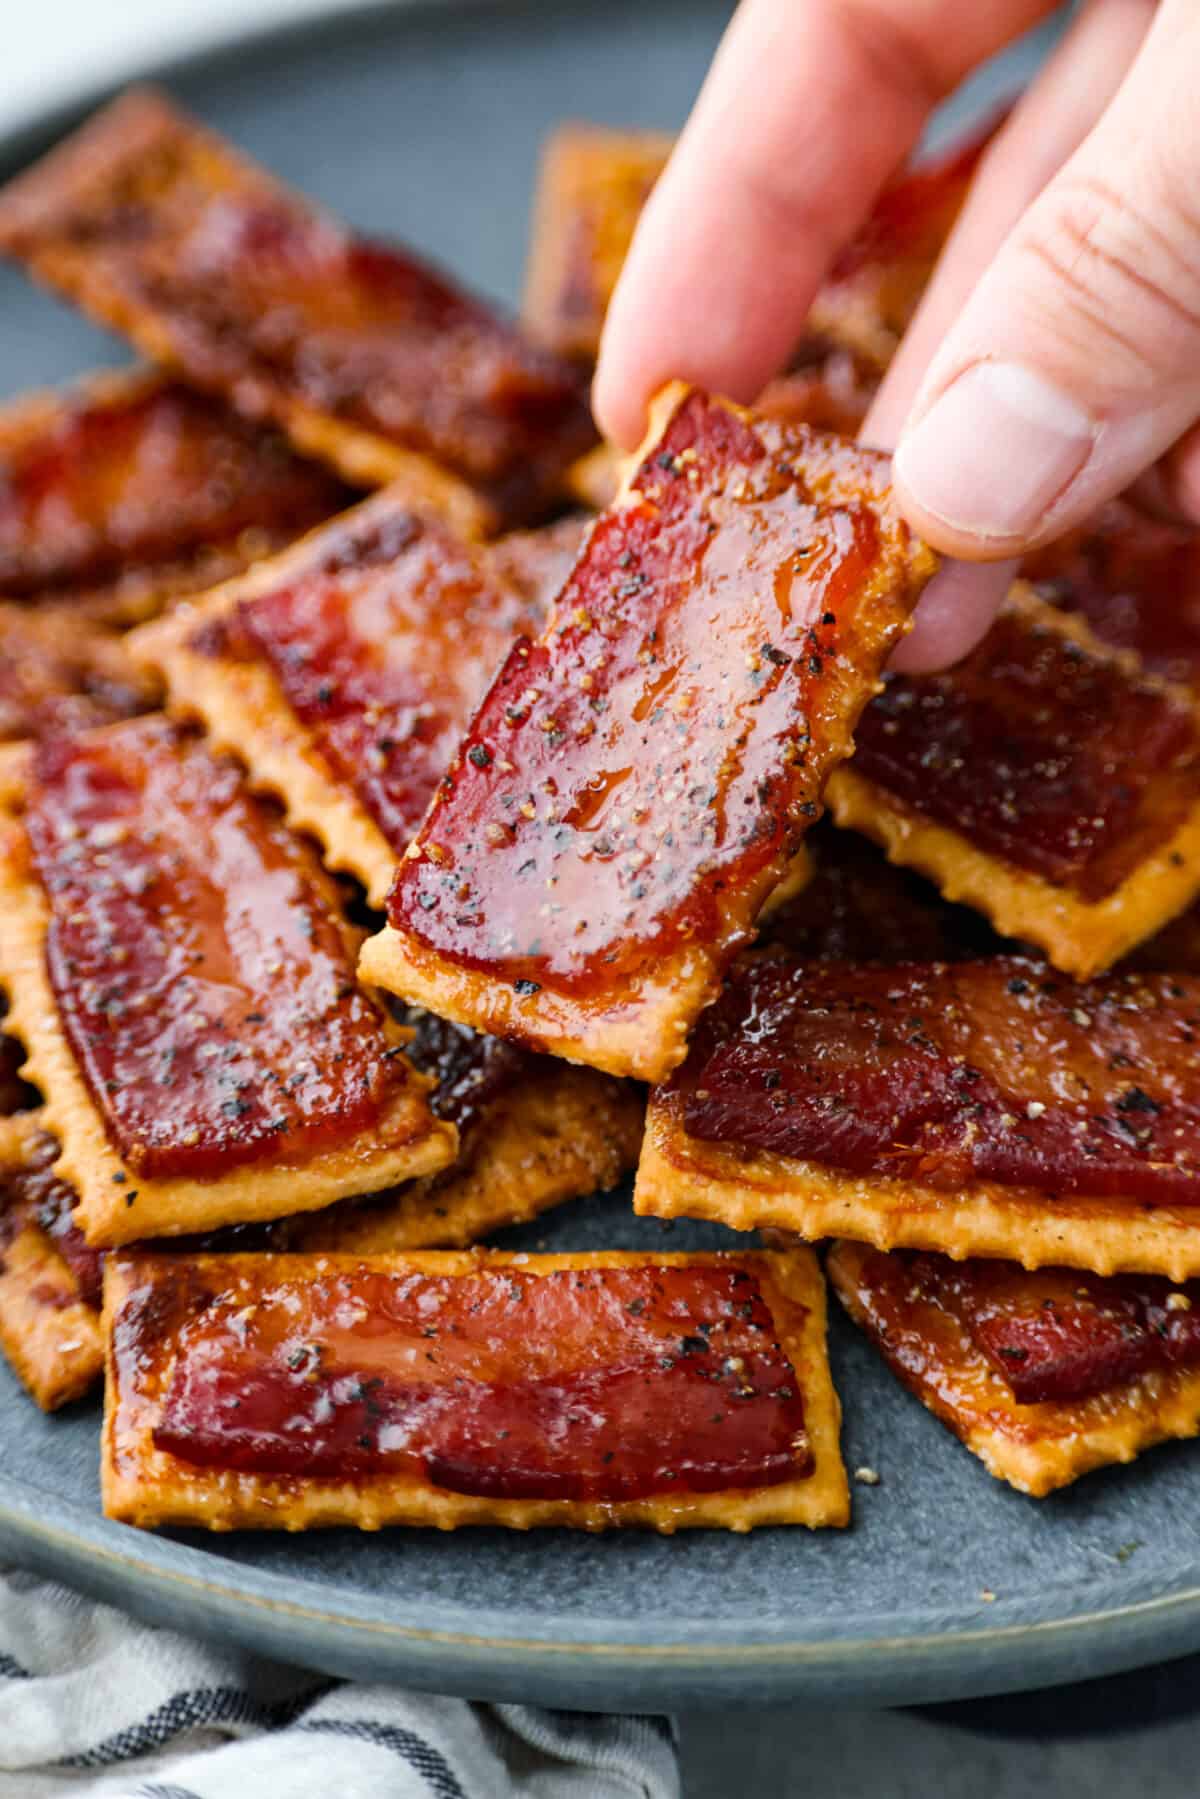 Close view of a hand holding up a bacon cracker from a plate of stacked crackers.